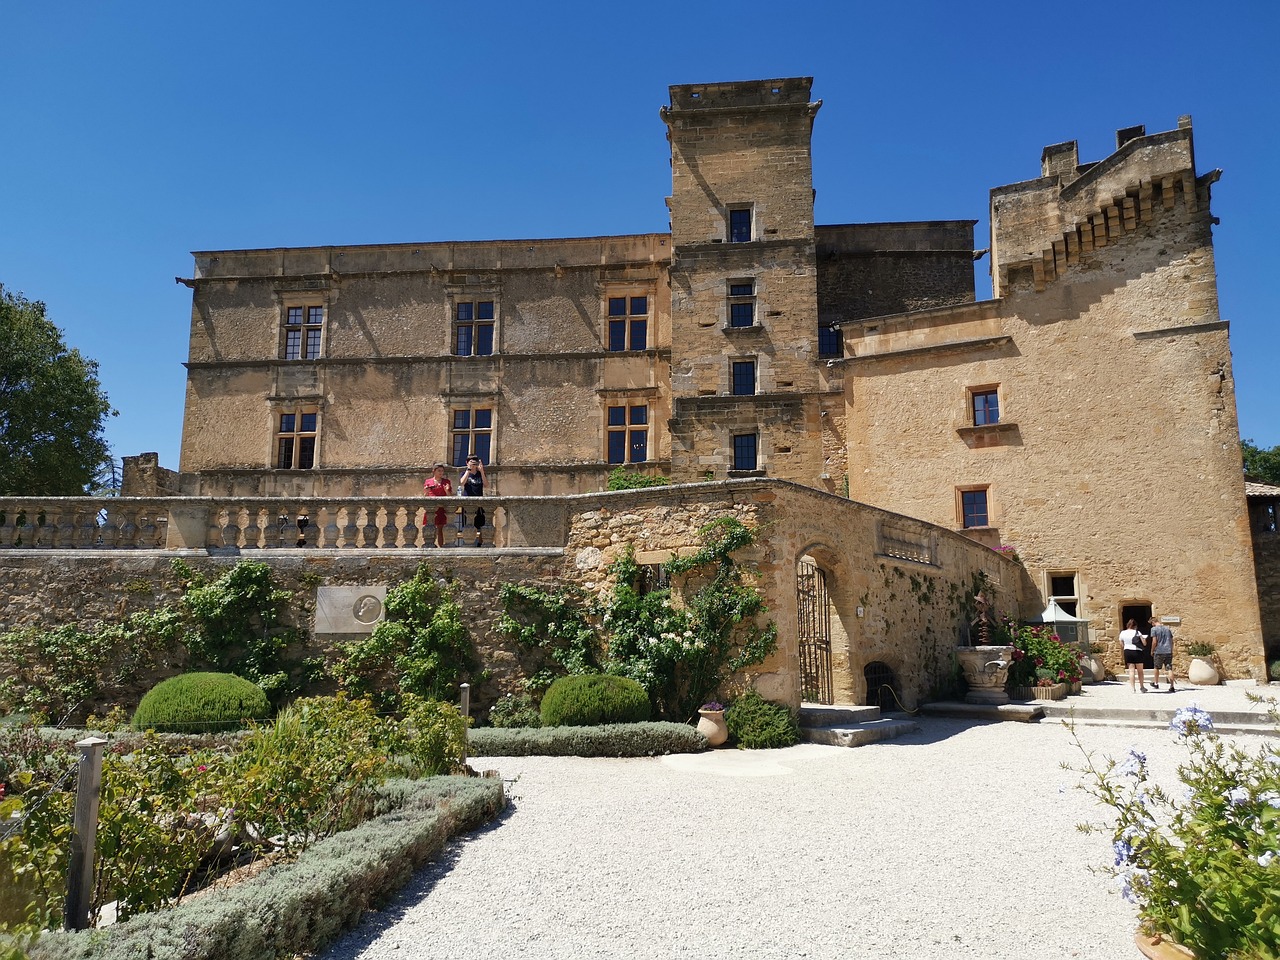 Aix-en-Provence and Luberon Delights